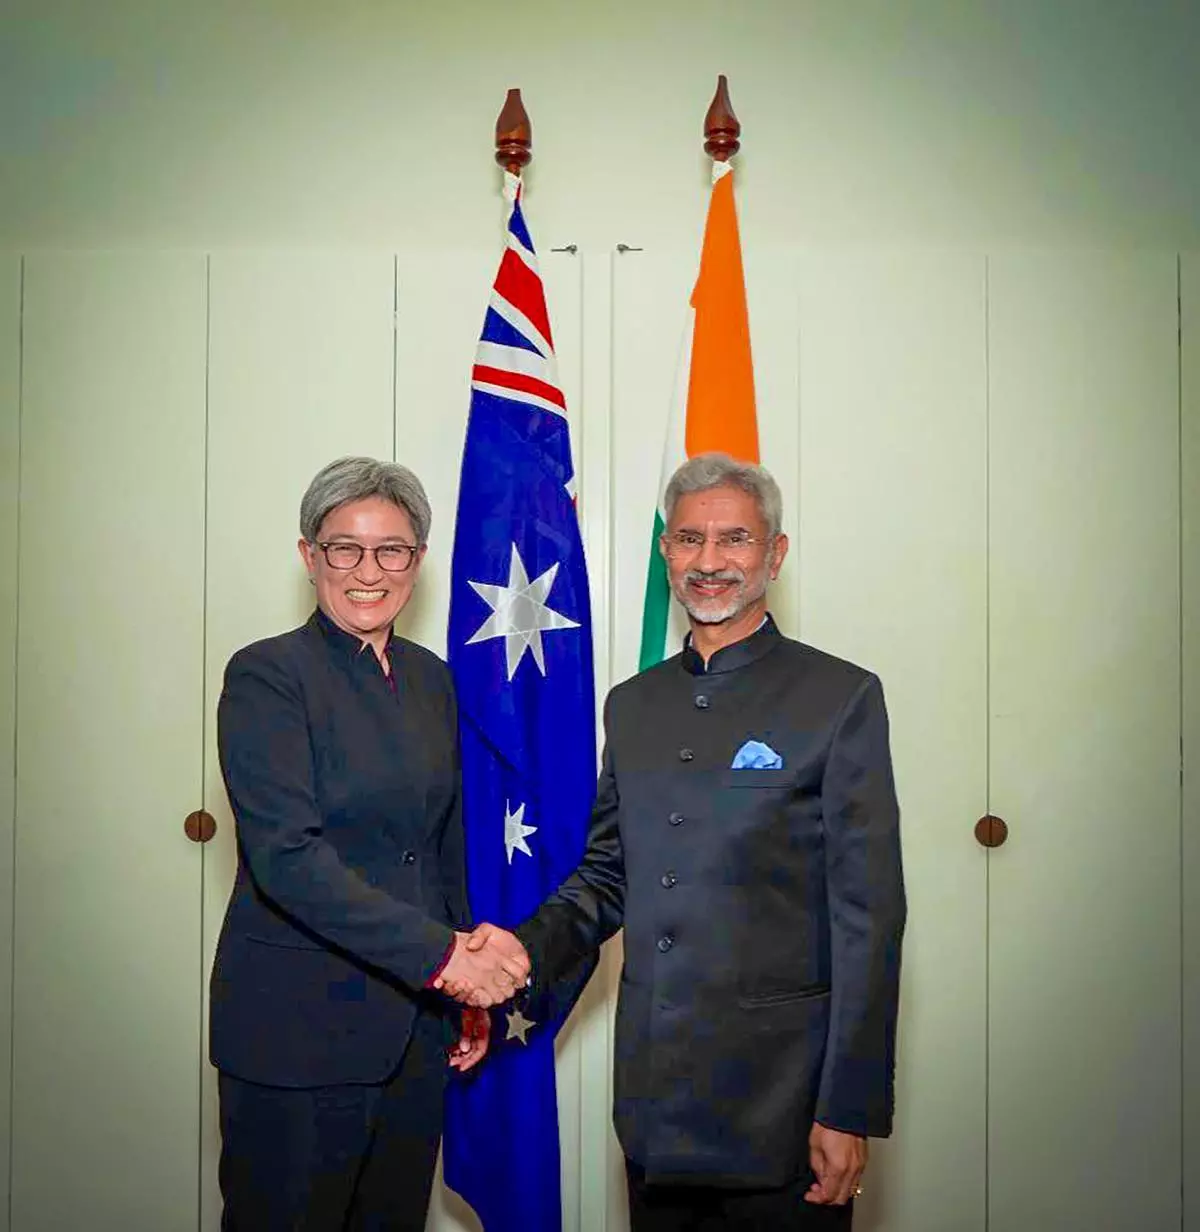 Canberra: External Affairs Minister S. Jaishankar with Minister for Foreign Affairs of Australia Penelope Wong during the 13th Foreign Ministers’ Framework Dialogue, in Canberra, Australia, Monday, Oct. 10, 2022. (PTI Photo)